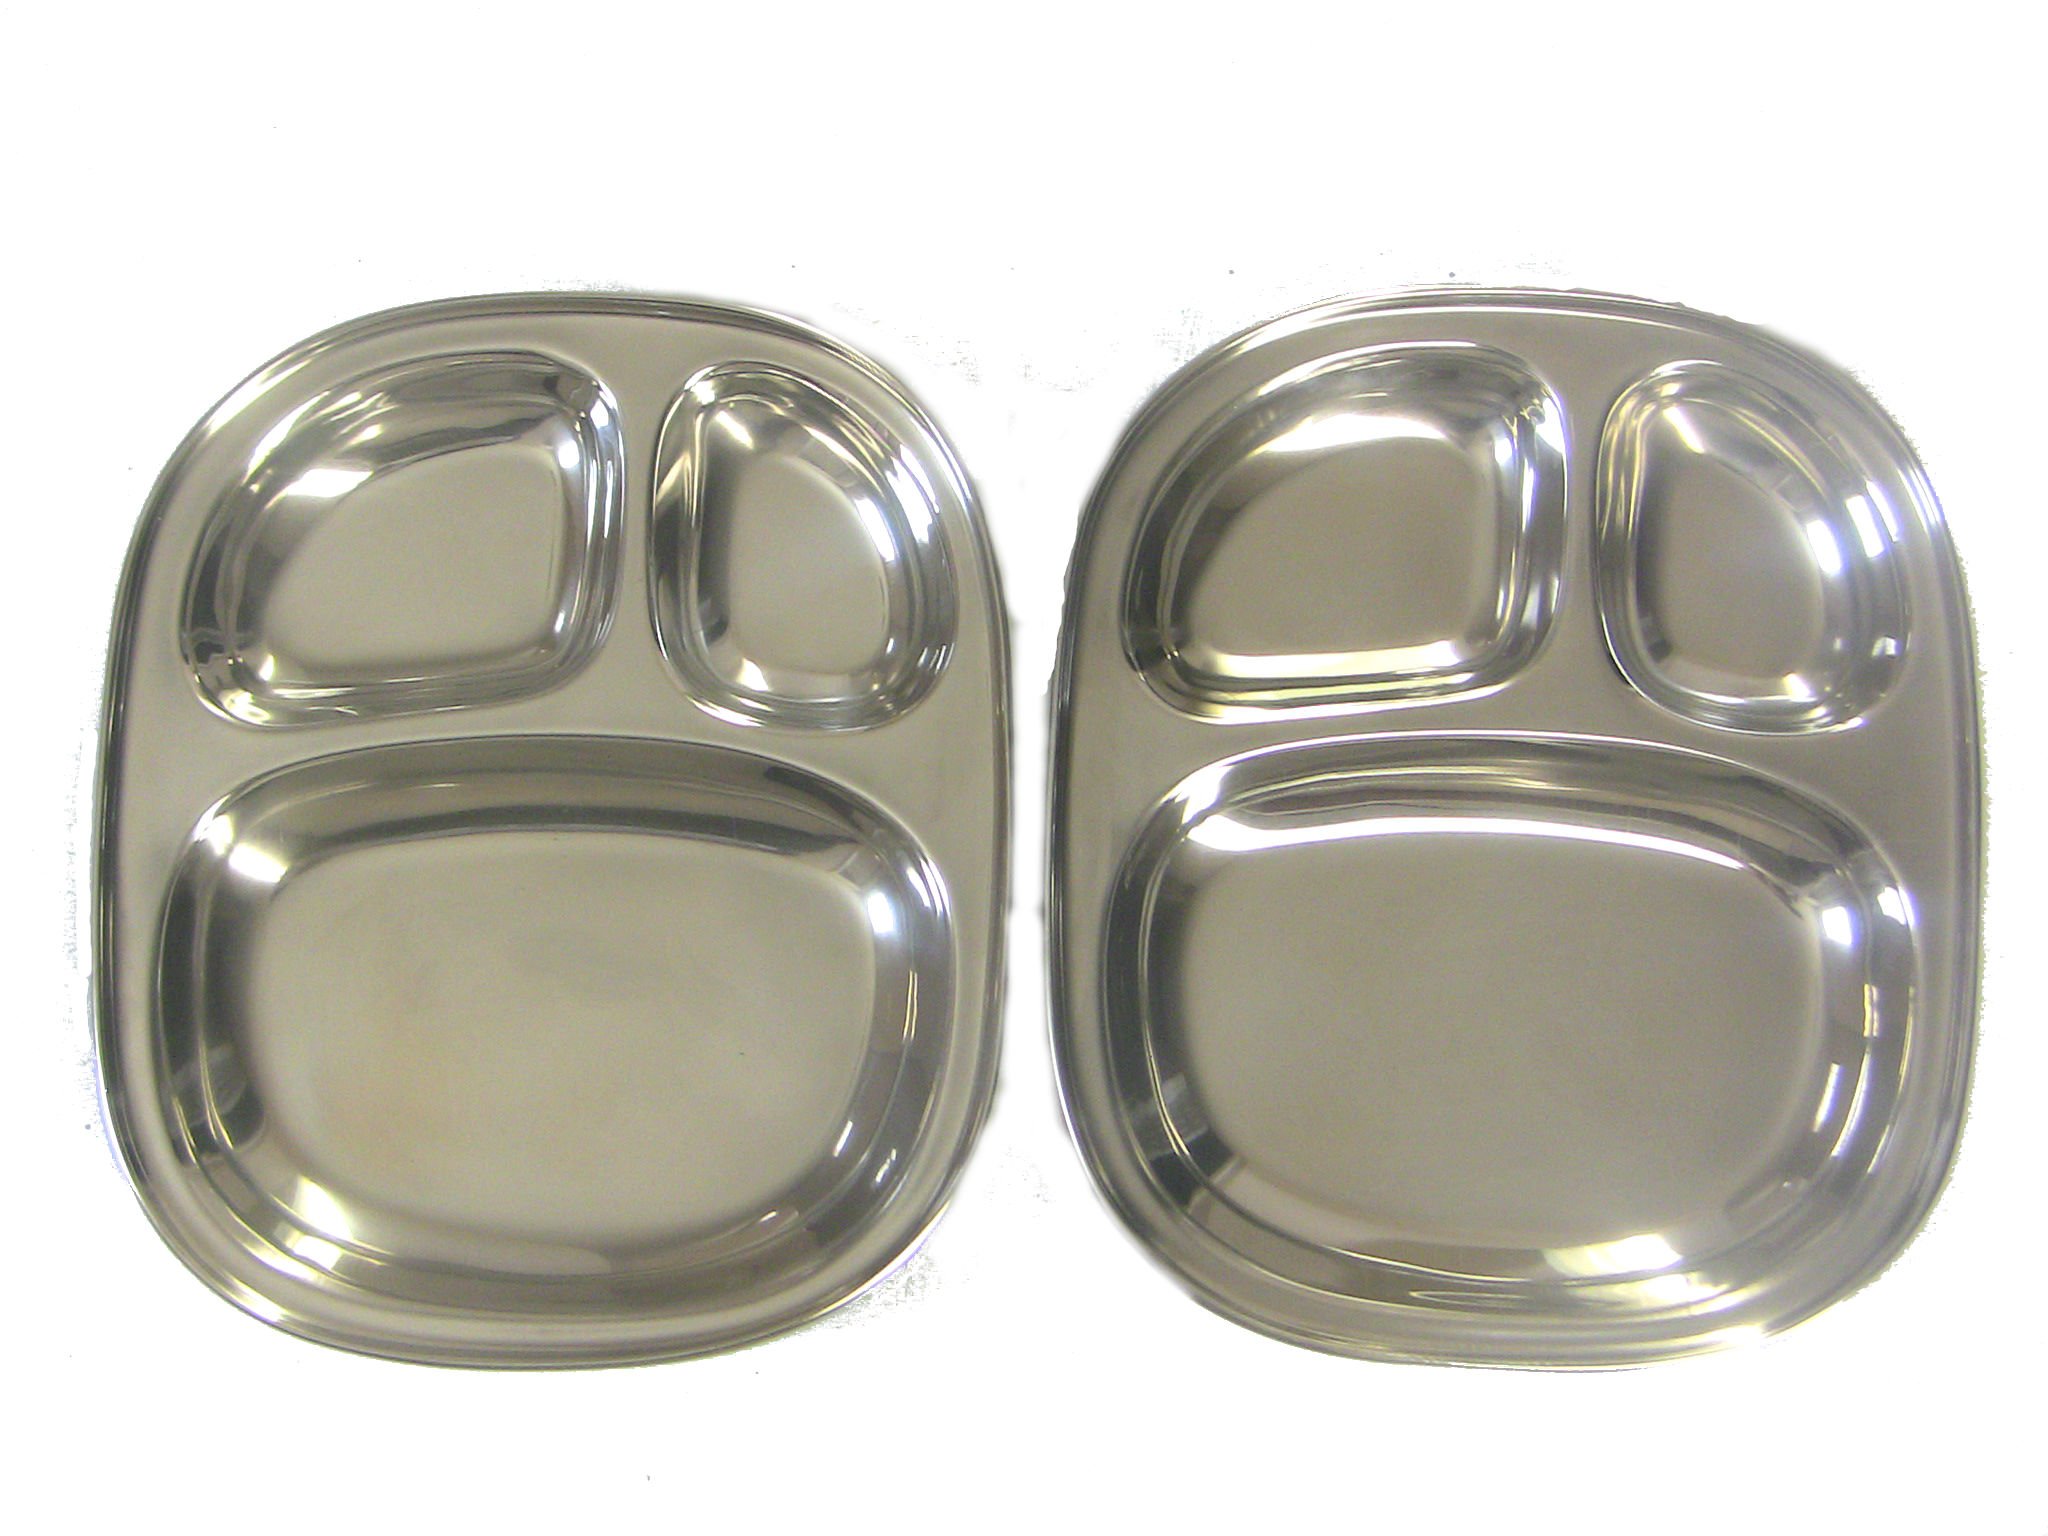 Qualways Kids's Tray - Divided Stainless Steel Tray Set of 2